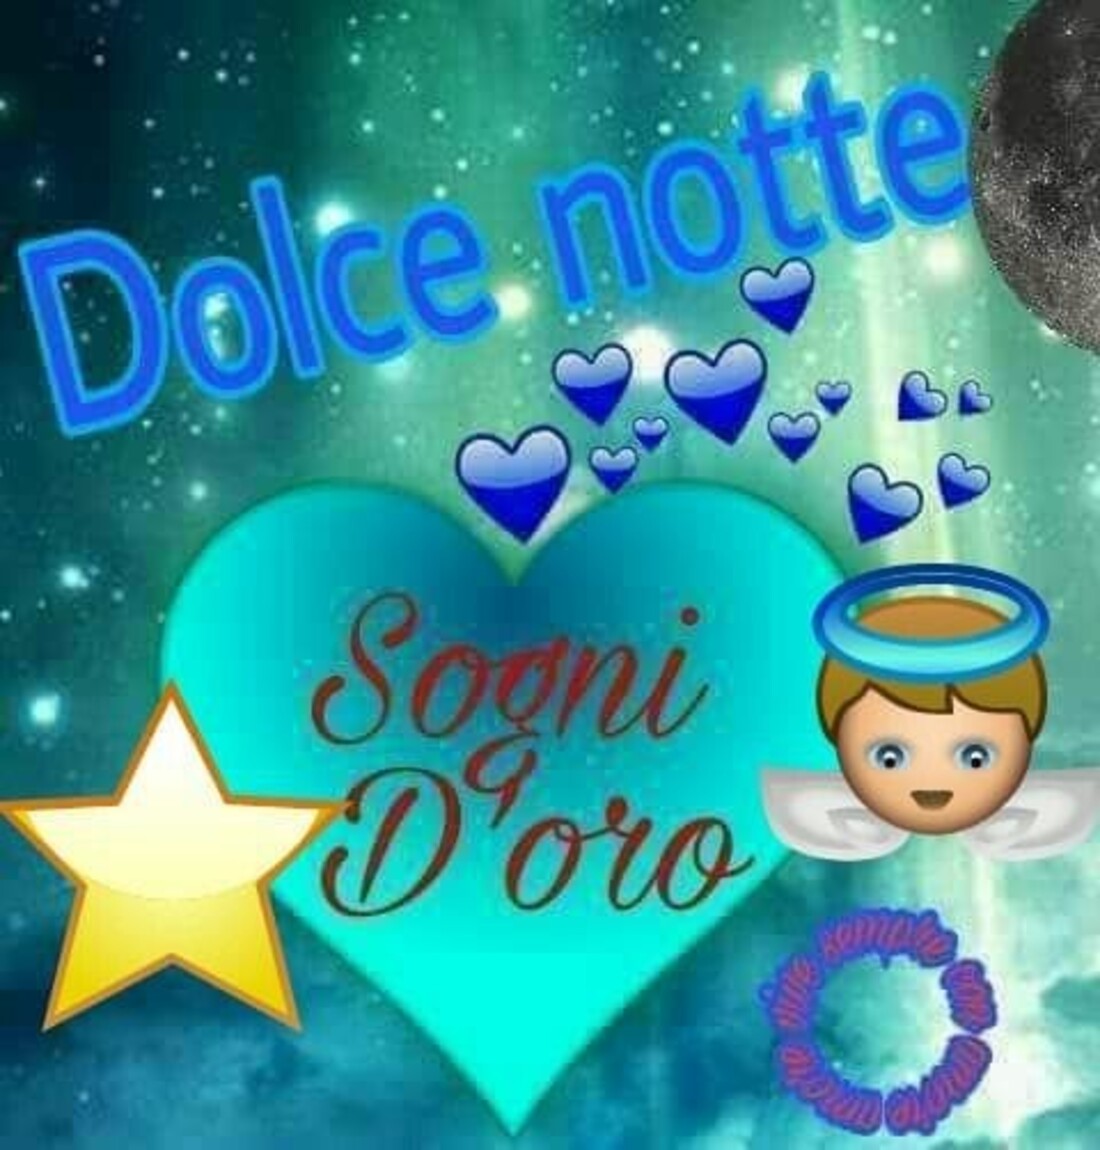 Dolce notte sogni d'oro